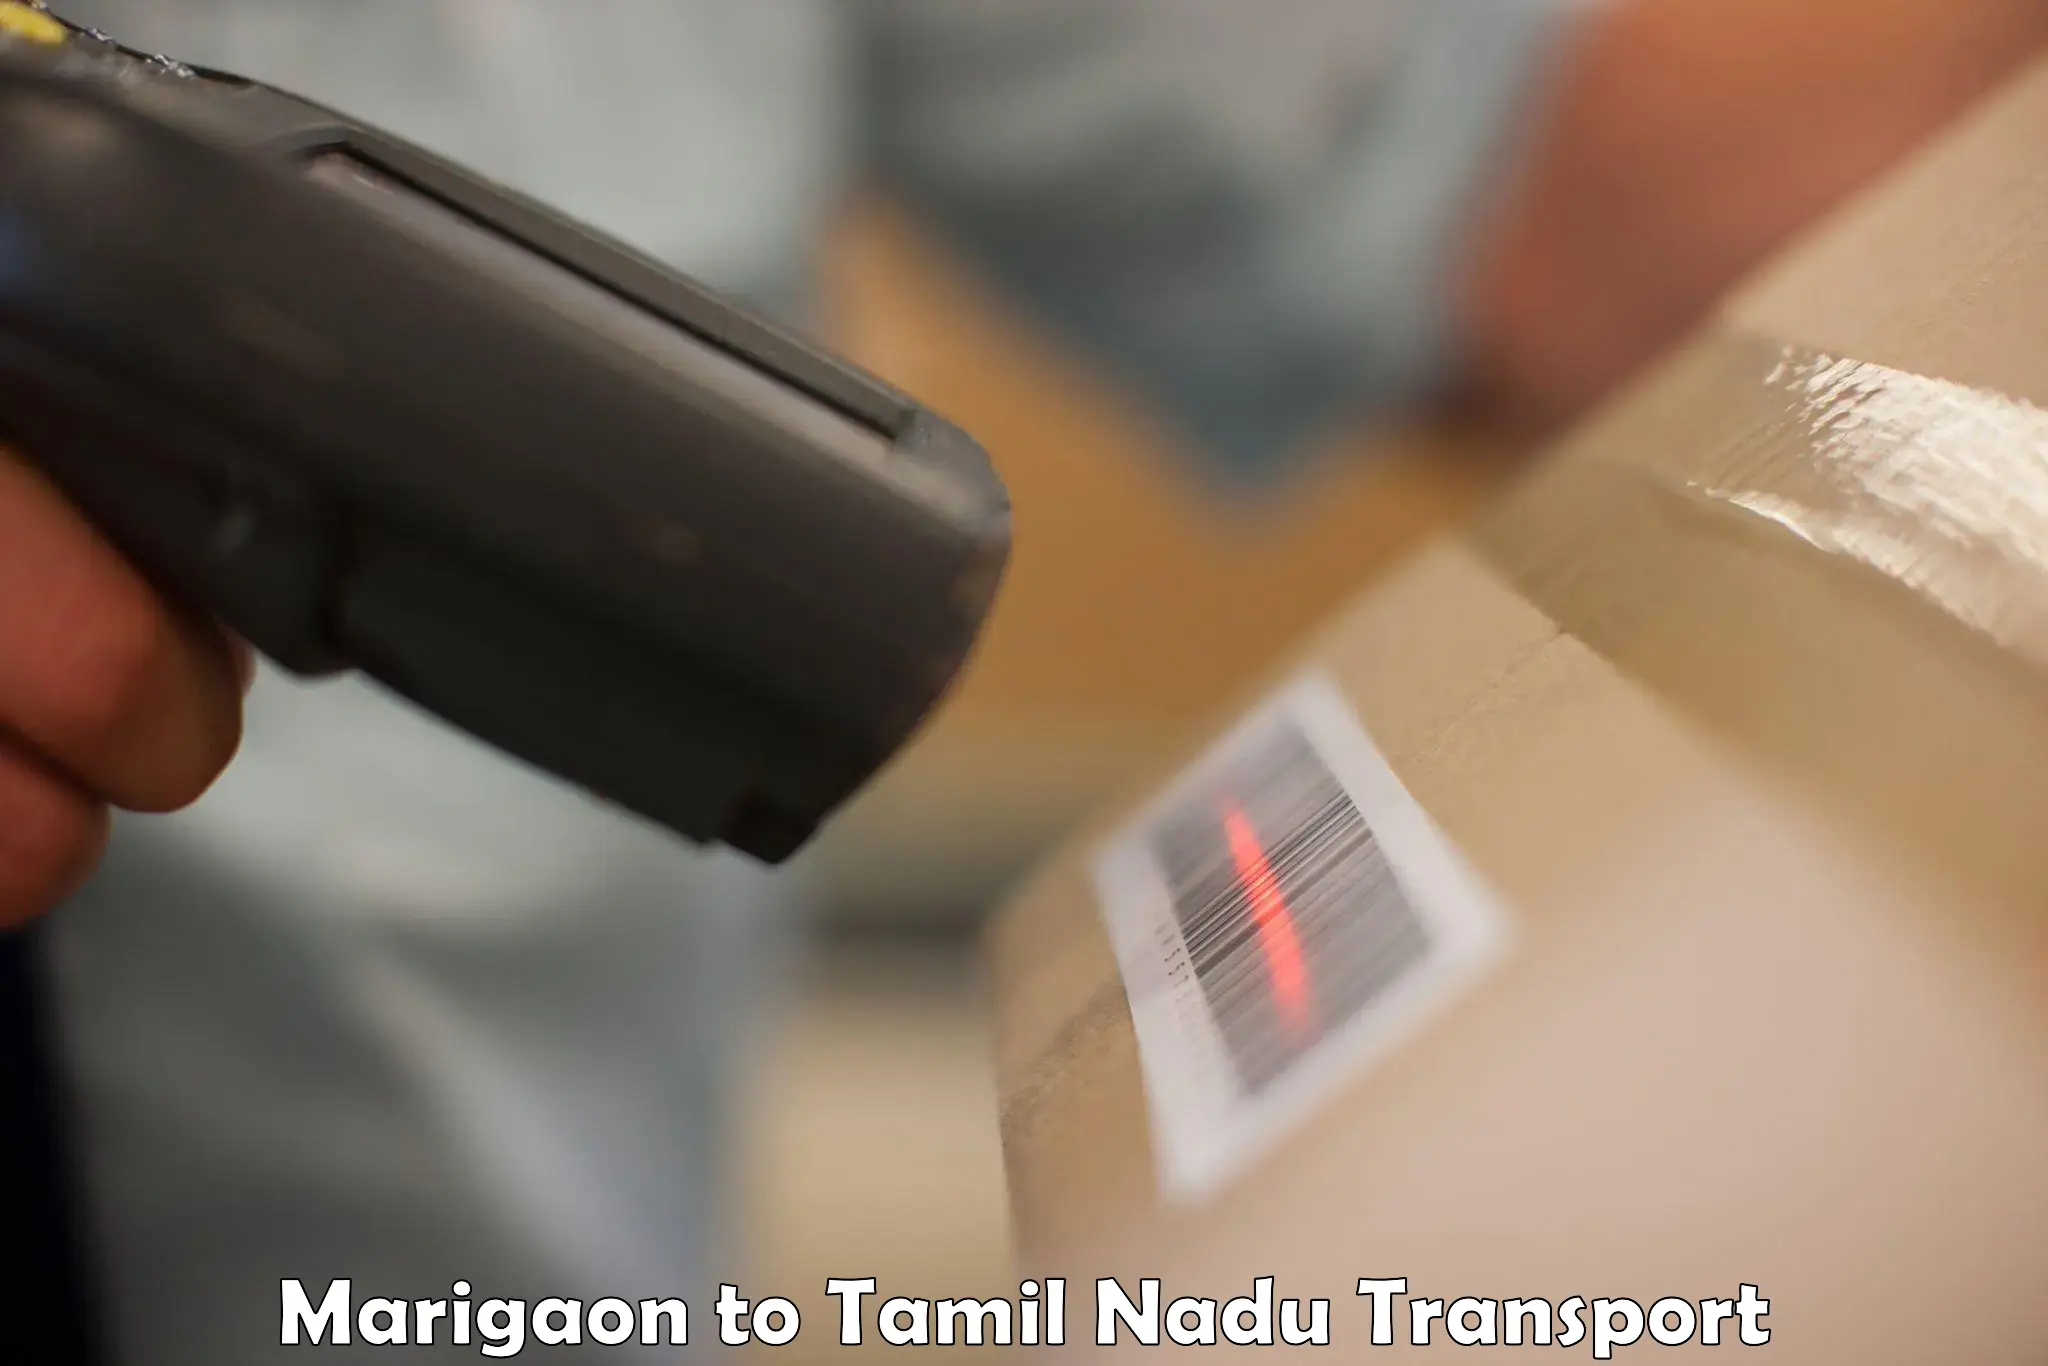 Cargo transport services Marigaon to Shanmugha Arts Science Technology and Research Academy Thanjavur